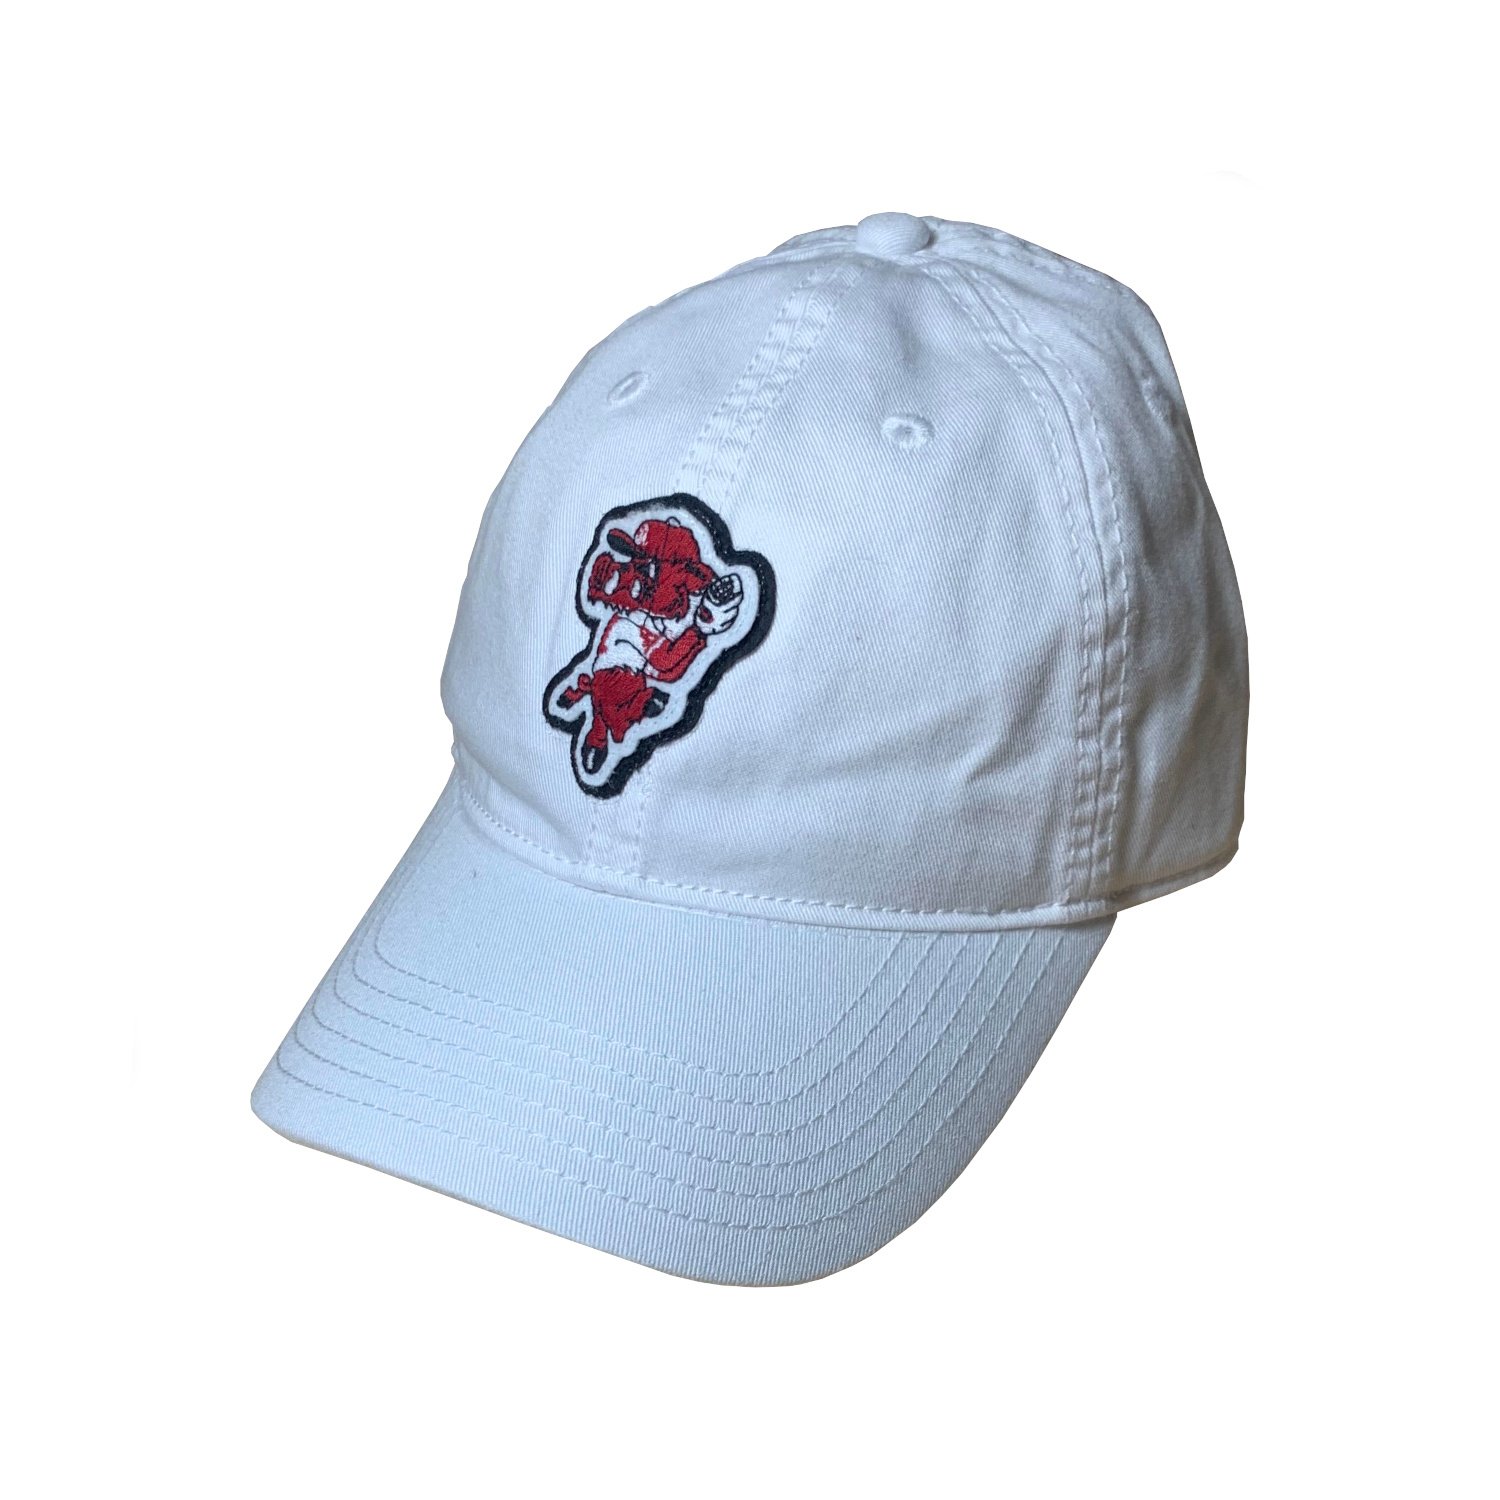 L2-League / Legacy Pitching Ribby Relaxed Twill Hat